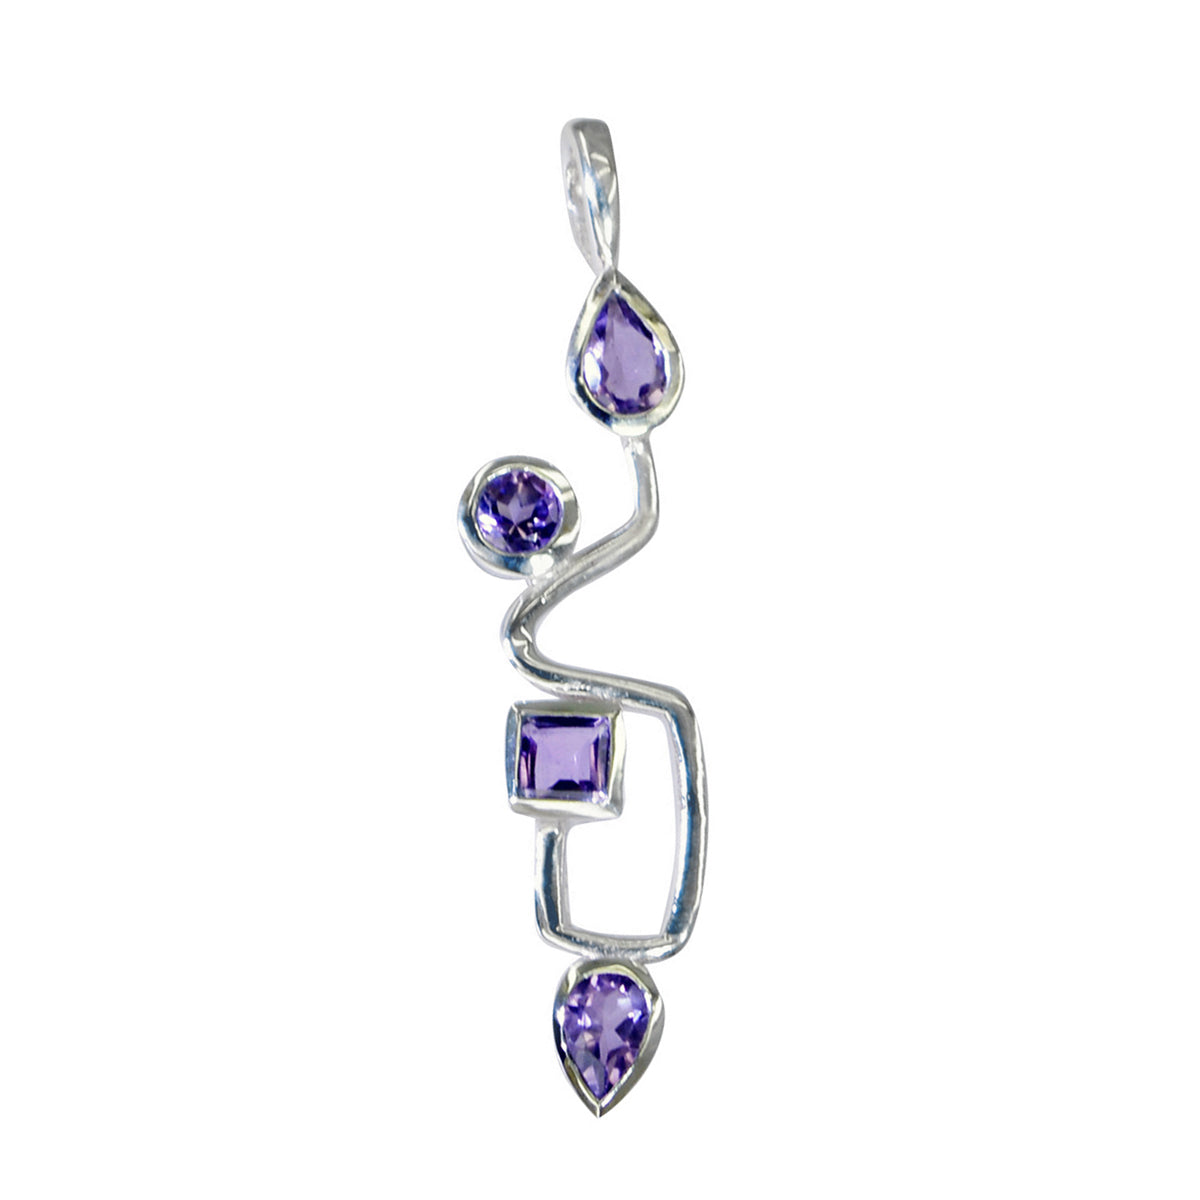 Riyo Easy Gems Multi Faceted Purple Amethyst Solid Silver Pendant Gift For Good Friday